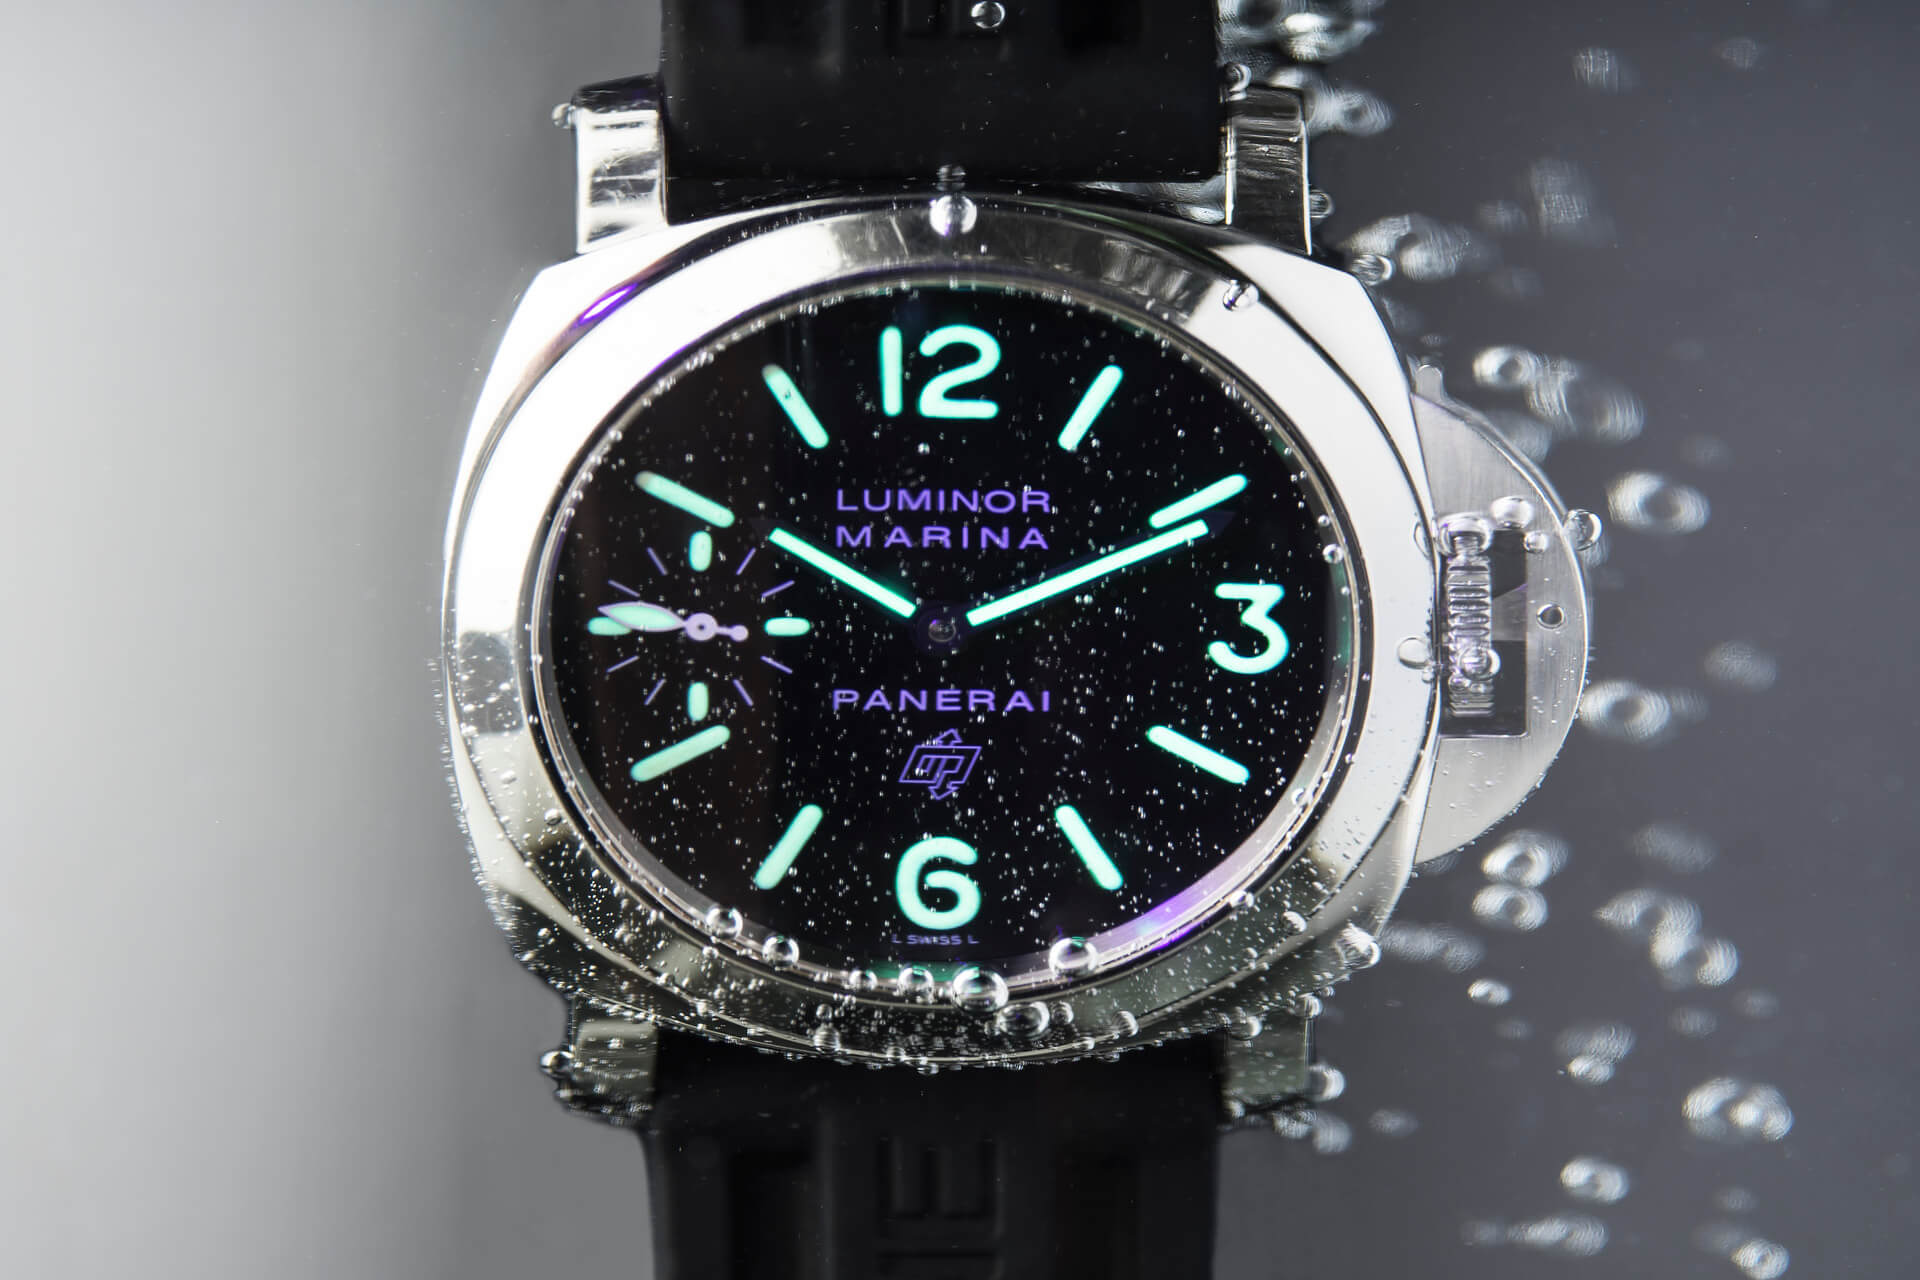 Sea, Salt, & Swimming; How To Care For Your Watches During The Summer Months